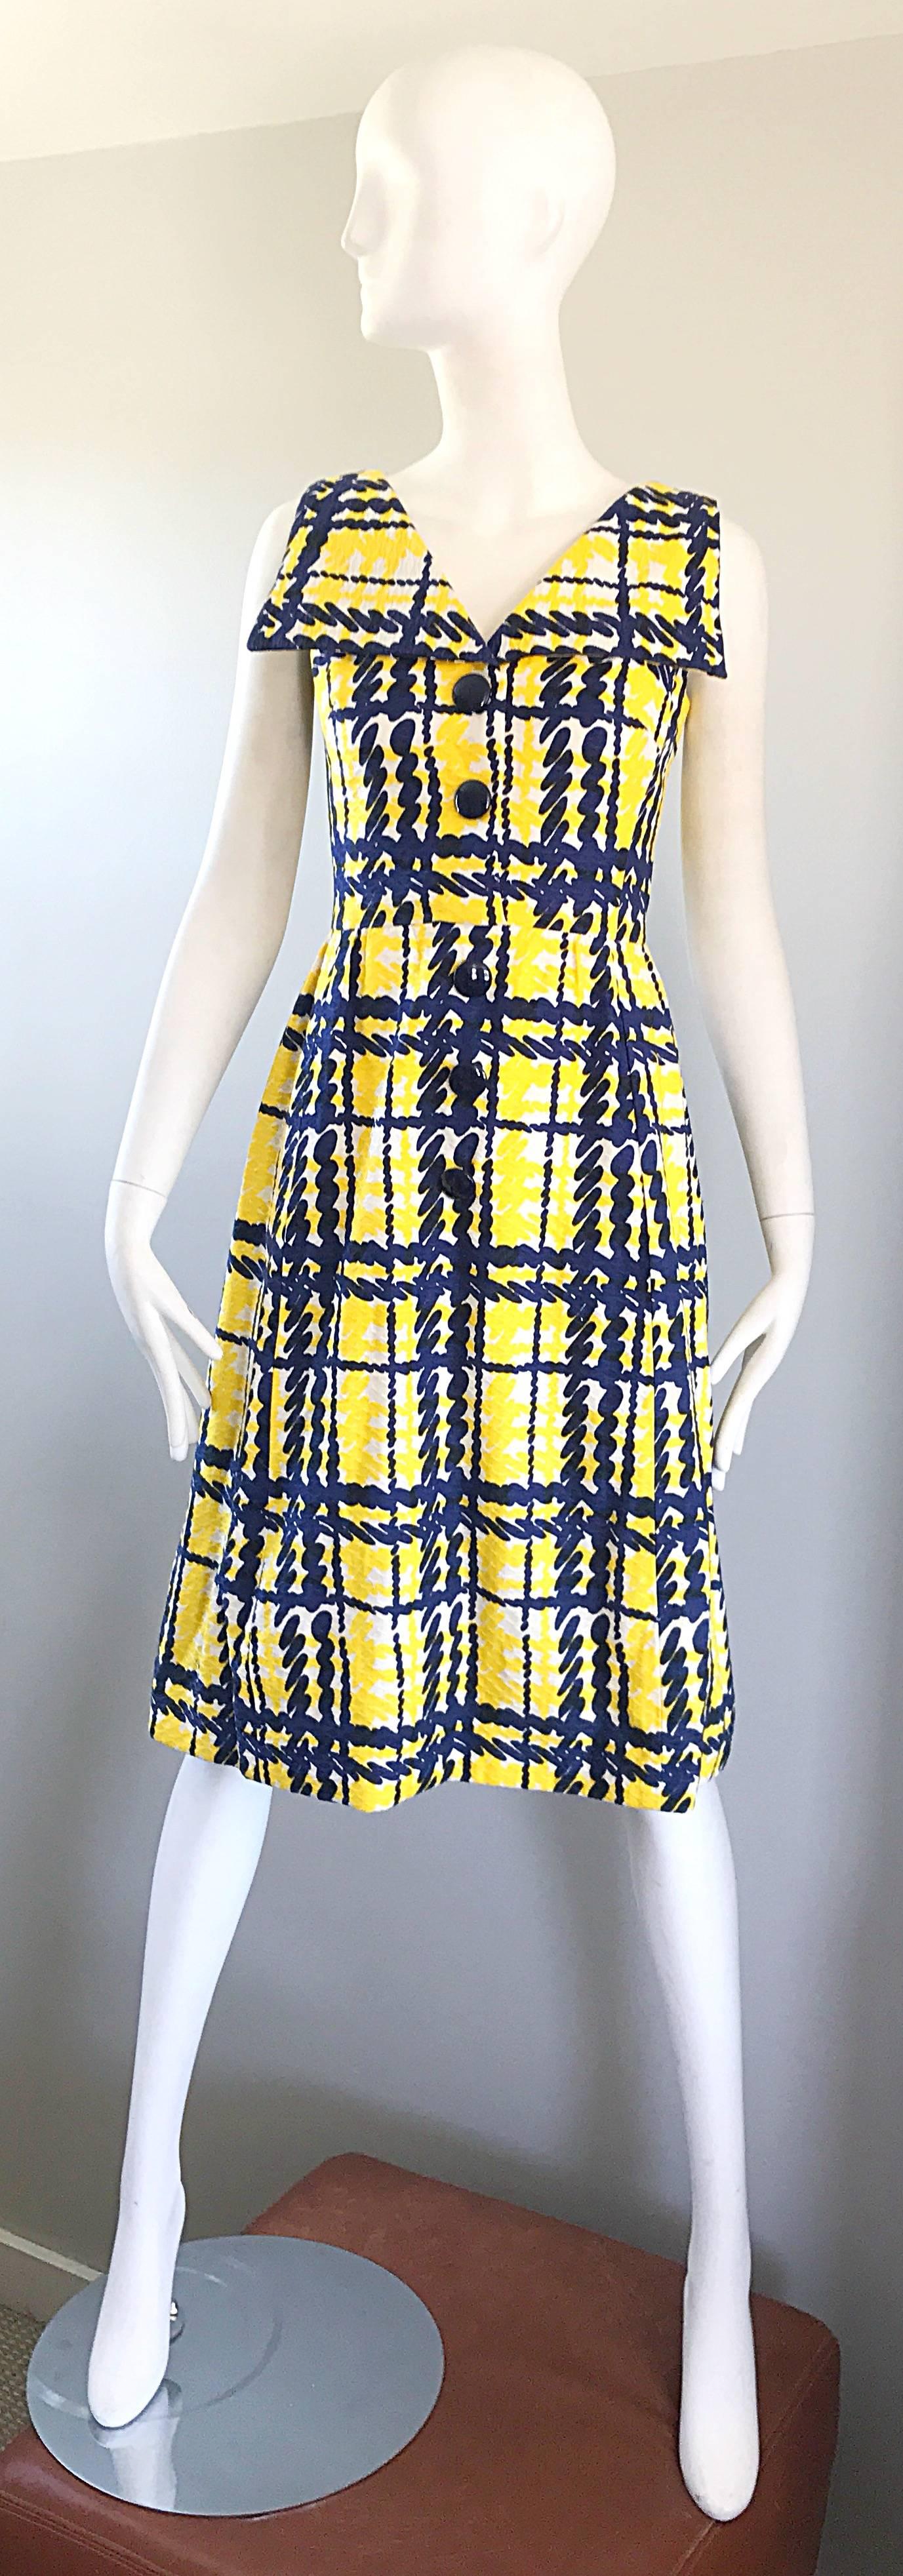 Alan Phillips Navy Blue Yellow and White Plaid Cotton A Line Dress, 1960s  3